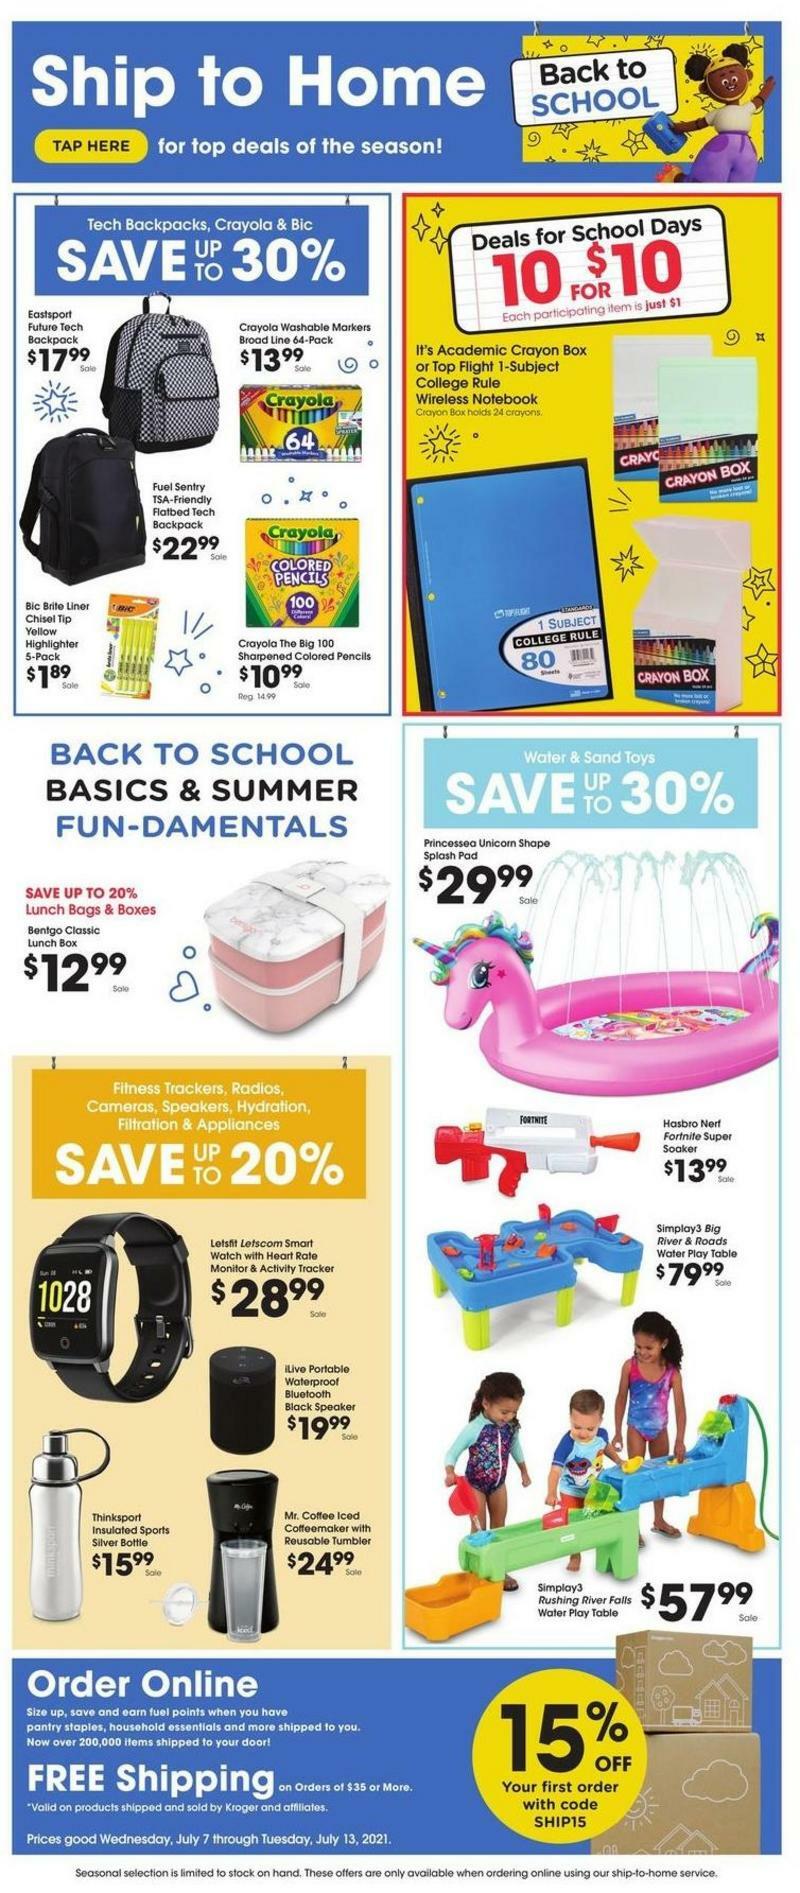 Kroger Ship to Home Weekly Ad from July 7